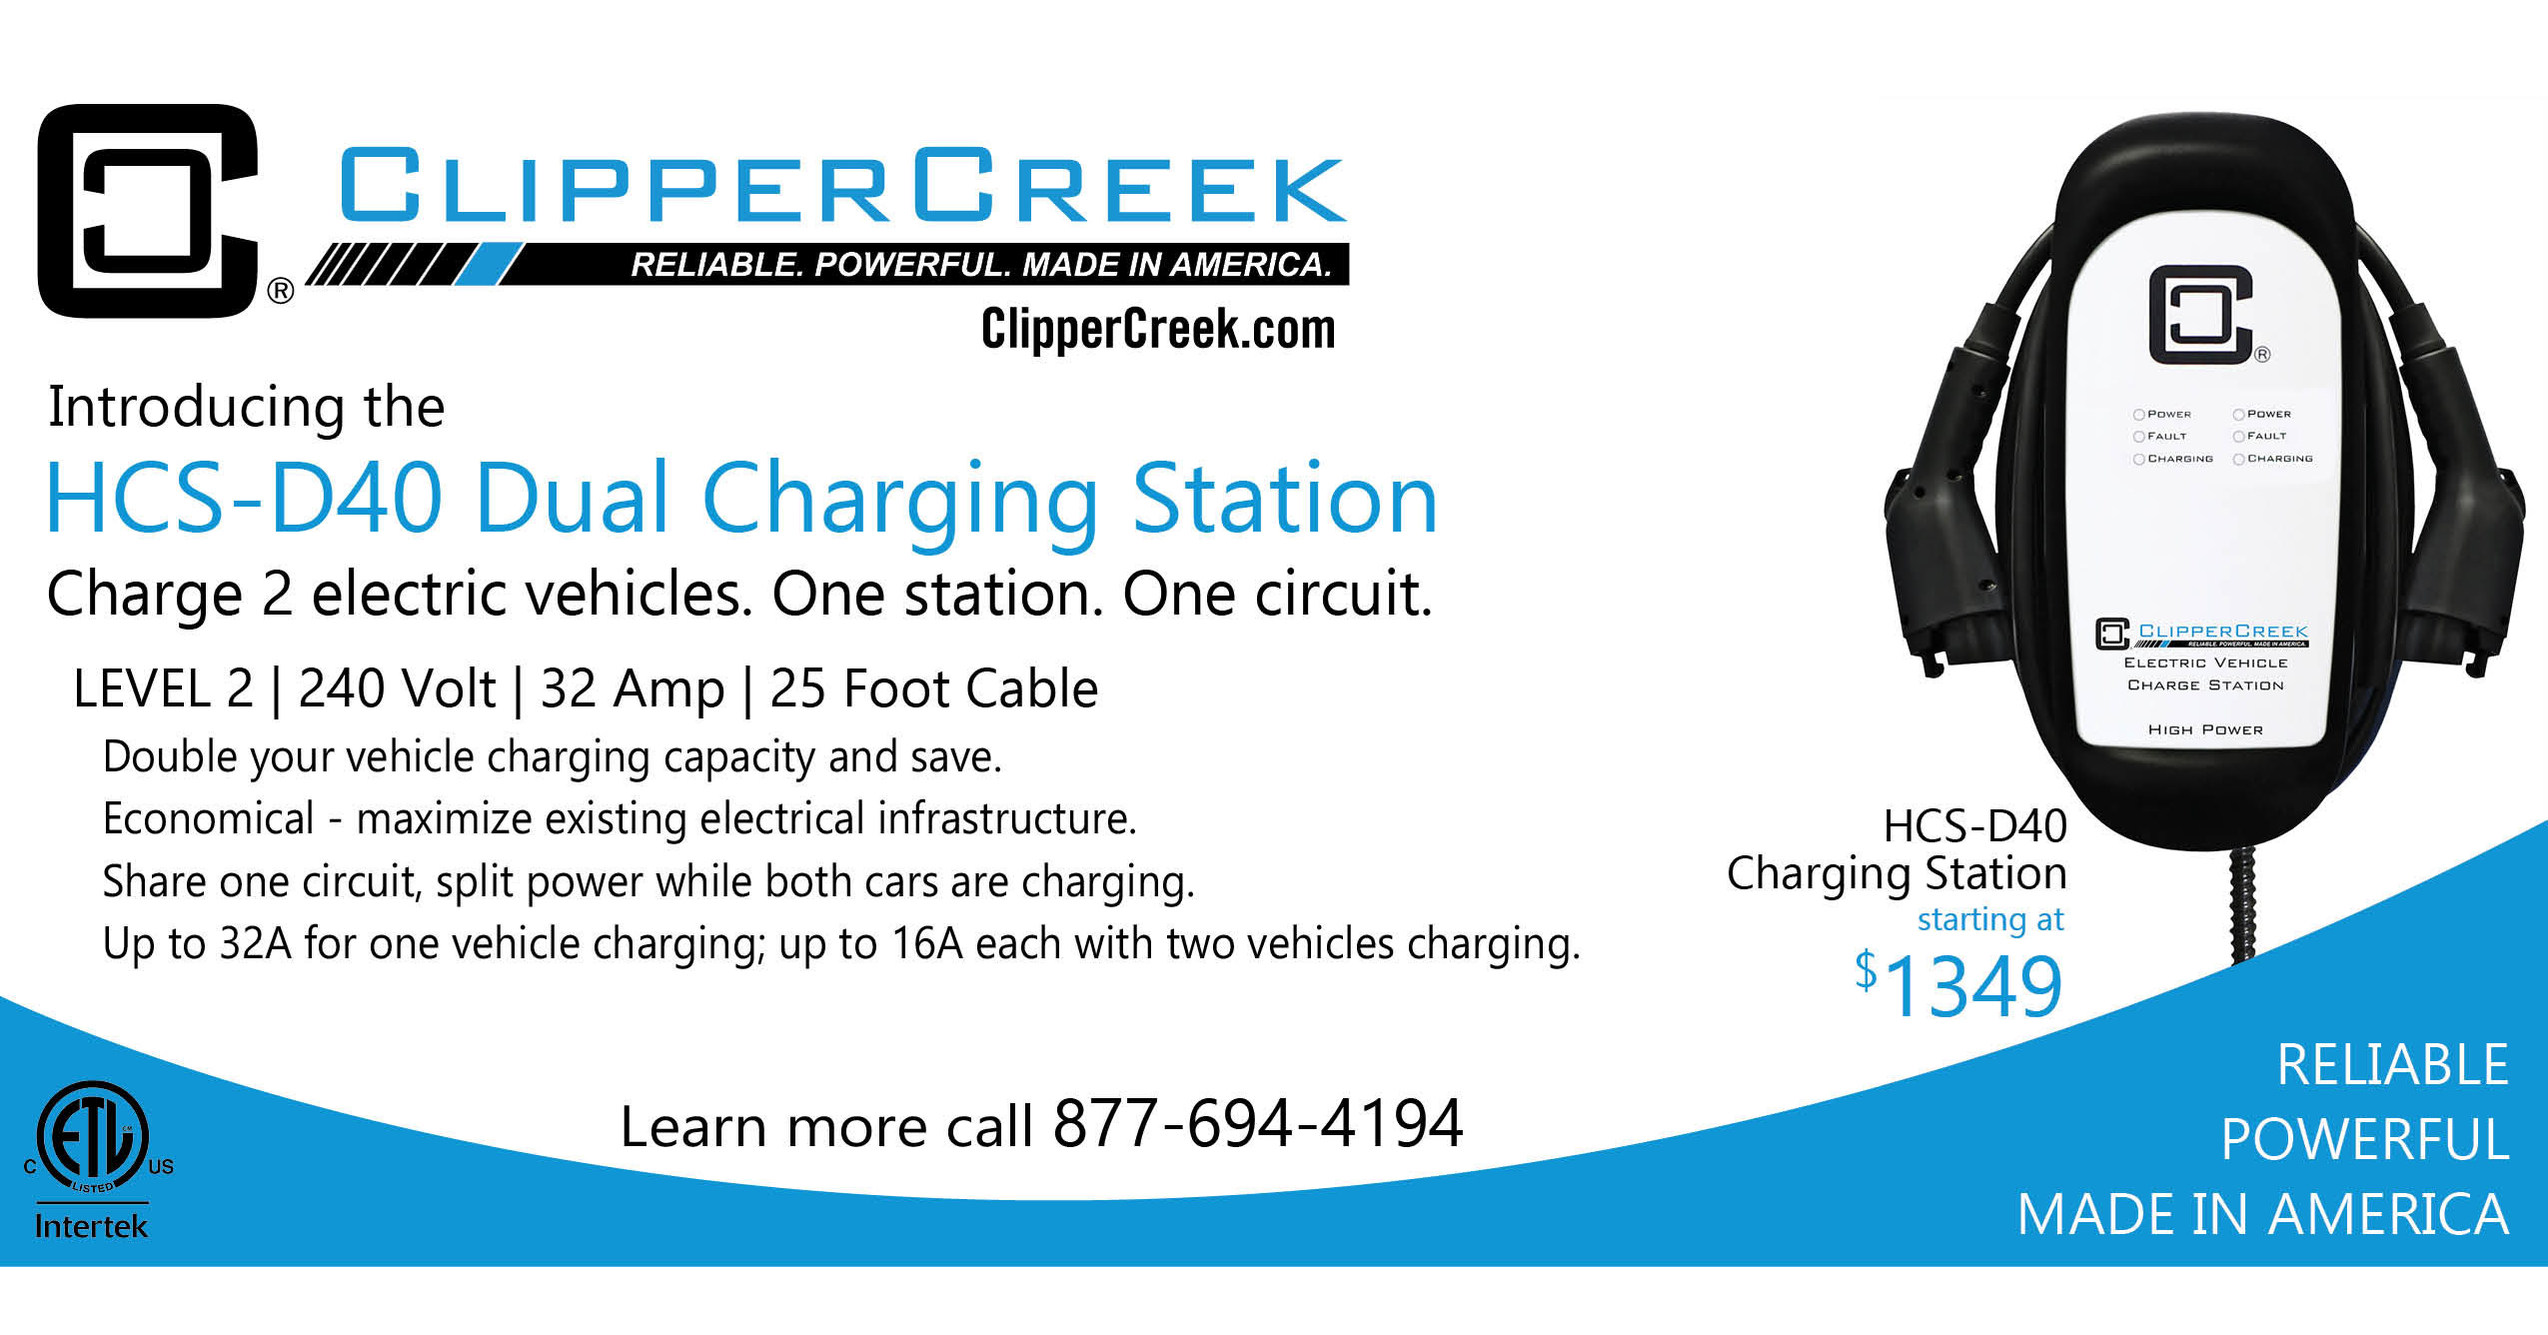 New ClipperCreek Dual Charging Station Charges Two Electric Vehicles